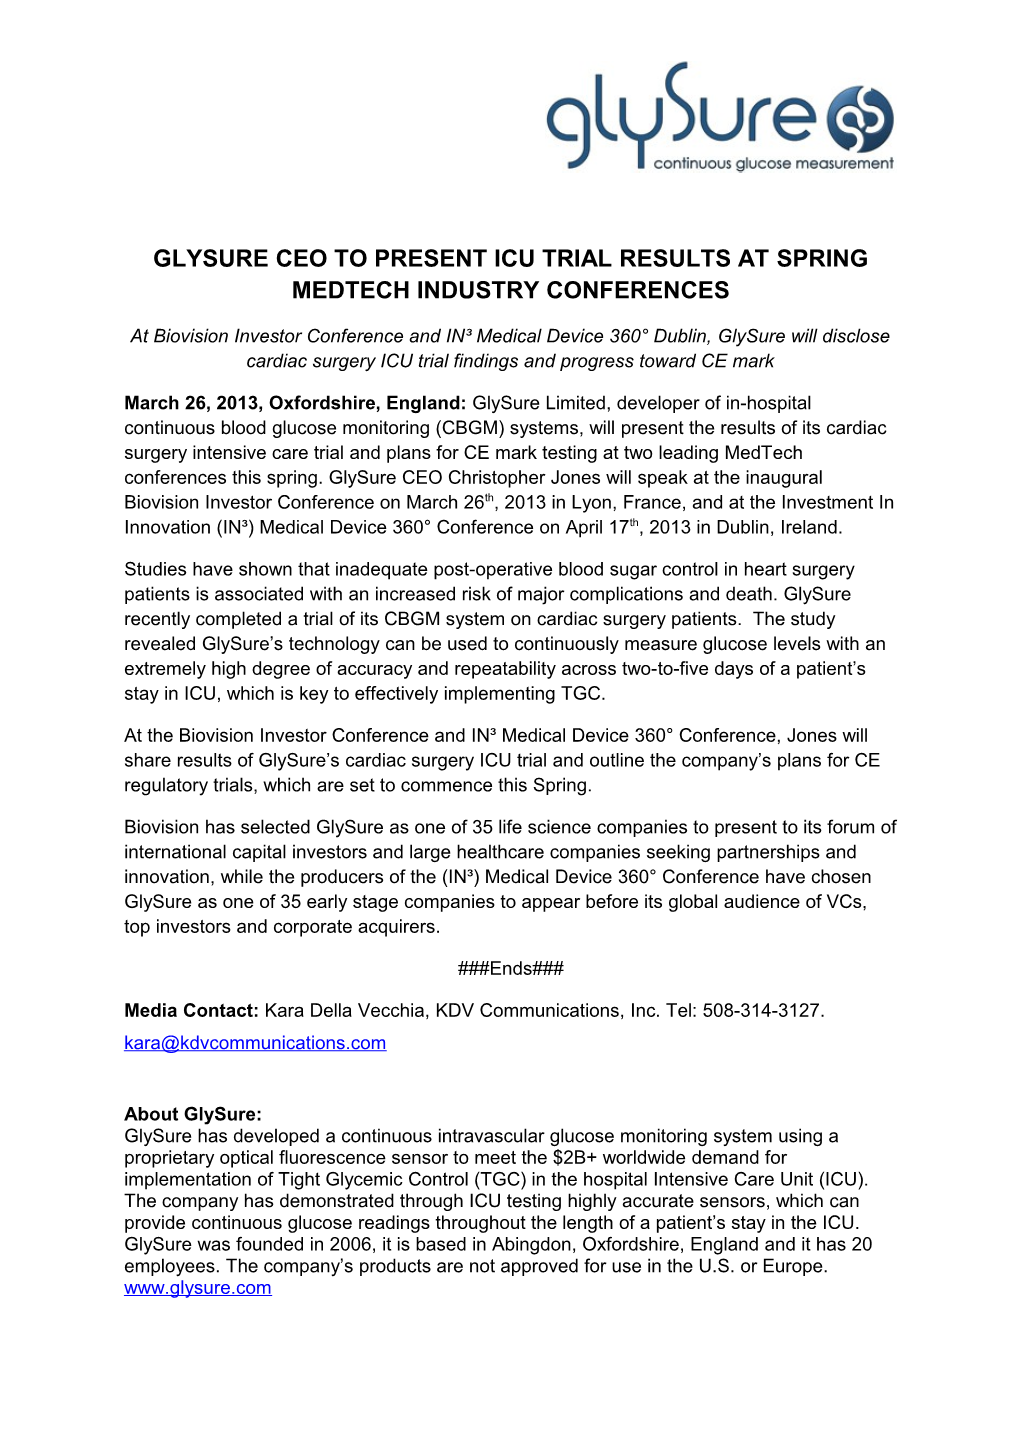 Glysure Ceo to Present Icu Trialresults at Spring Medtechindustry Conferences